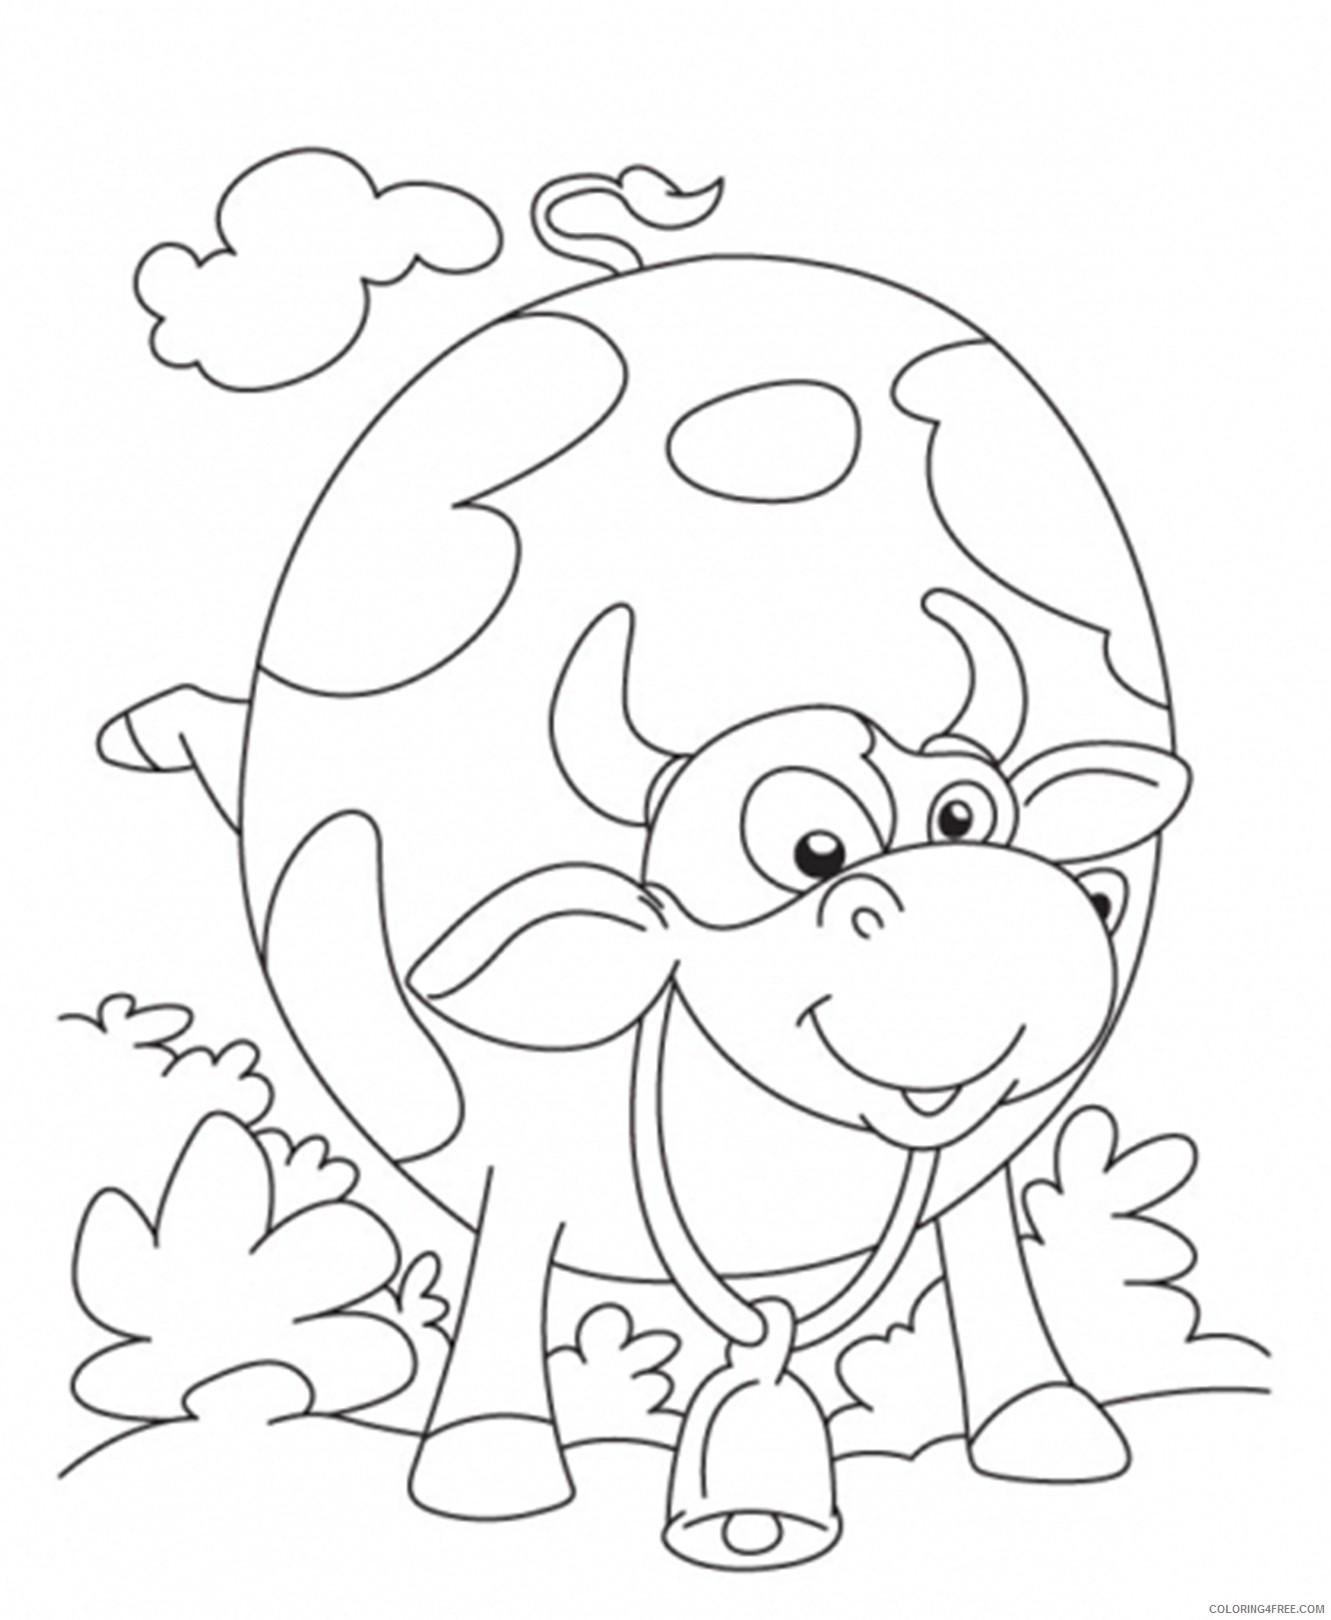 cow in field coloring pages for kids Coloring4free